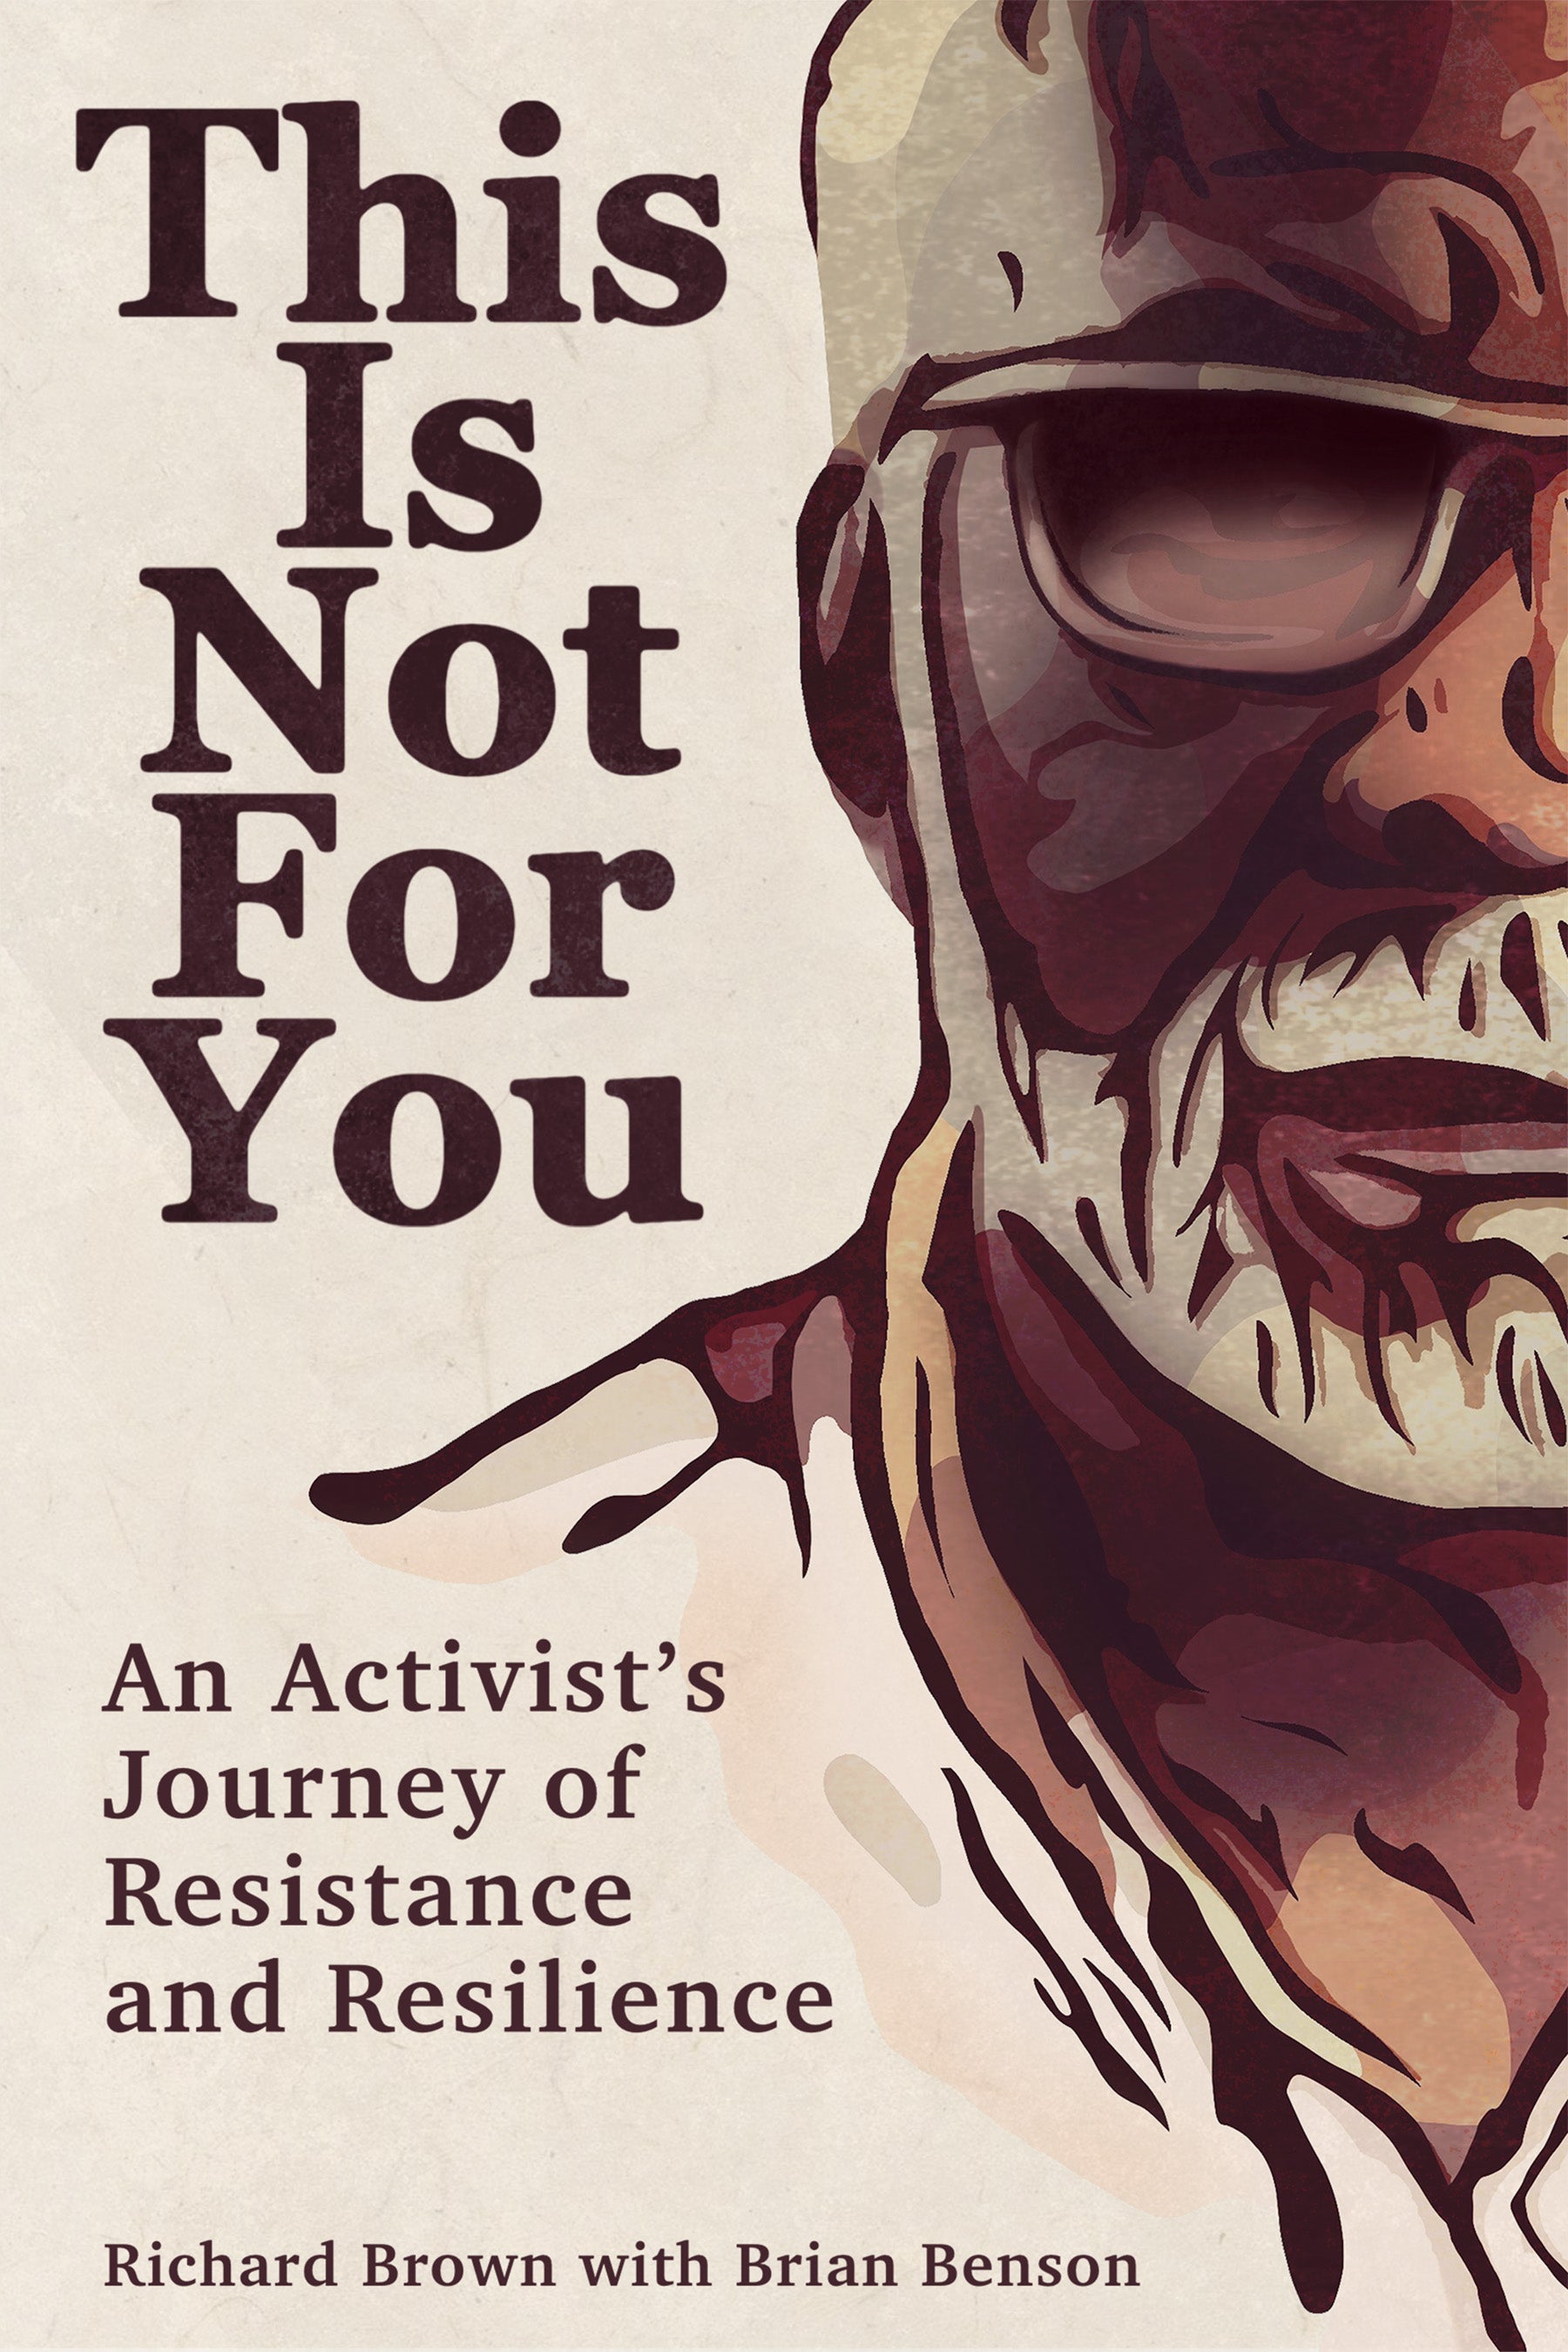 This Is Not For You - An Activist's Journey of Resistance and Resilience